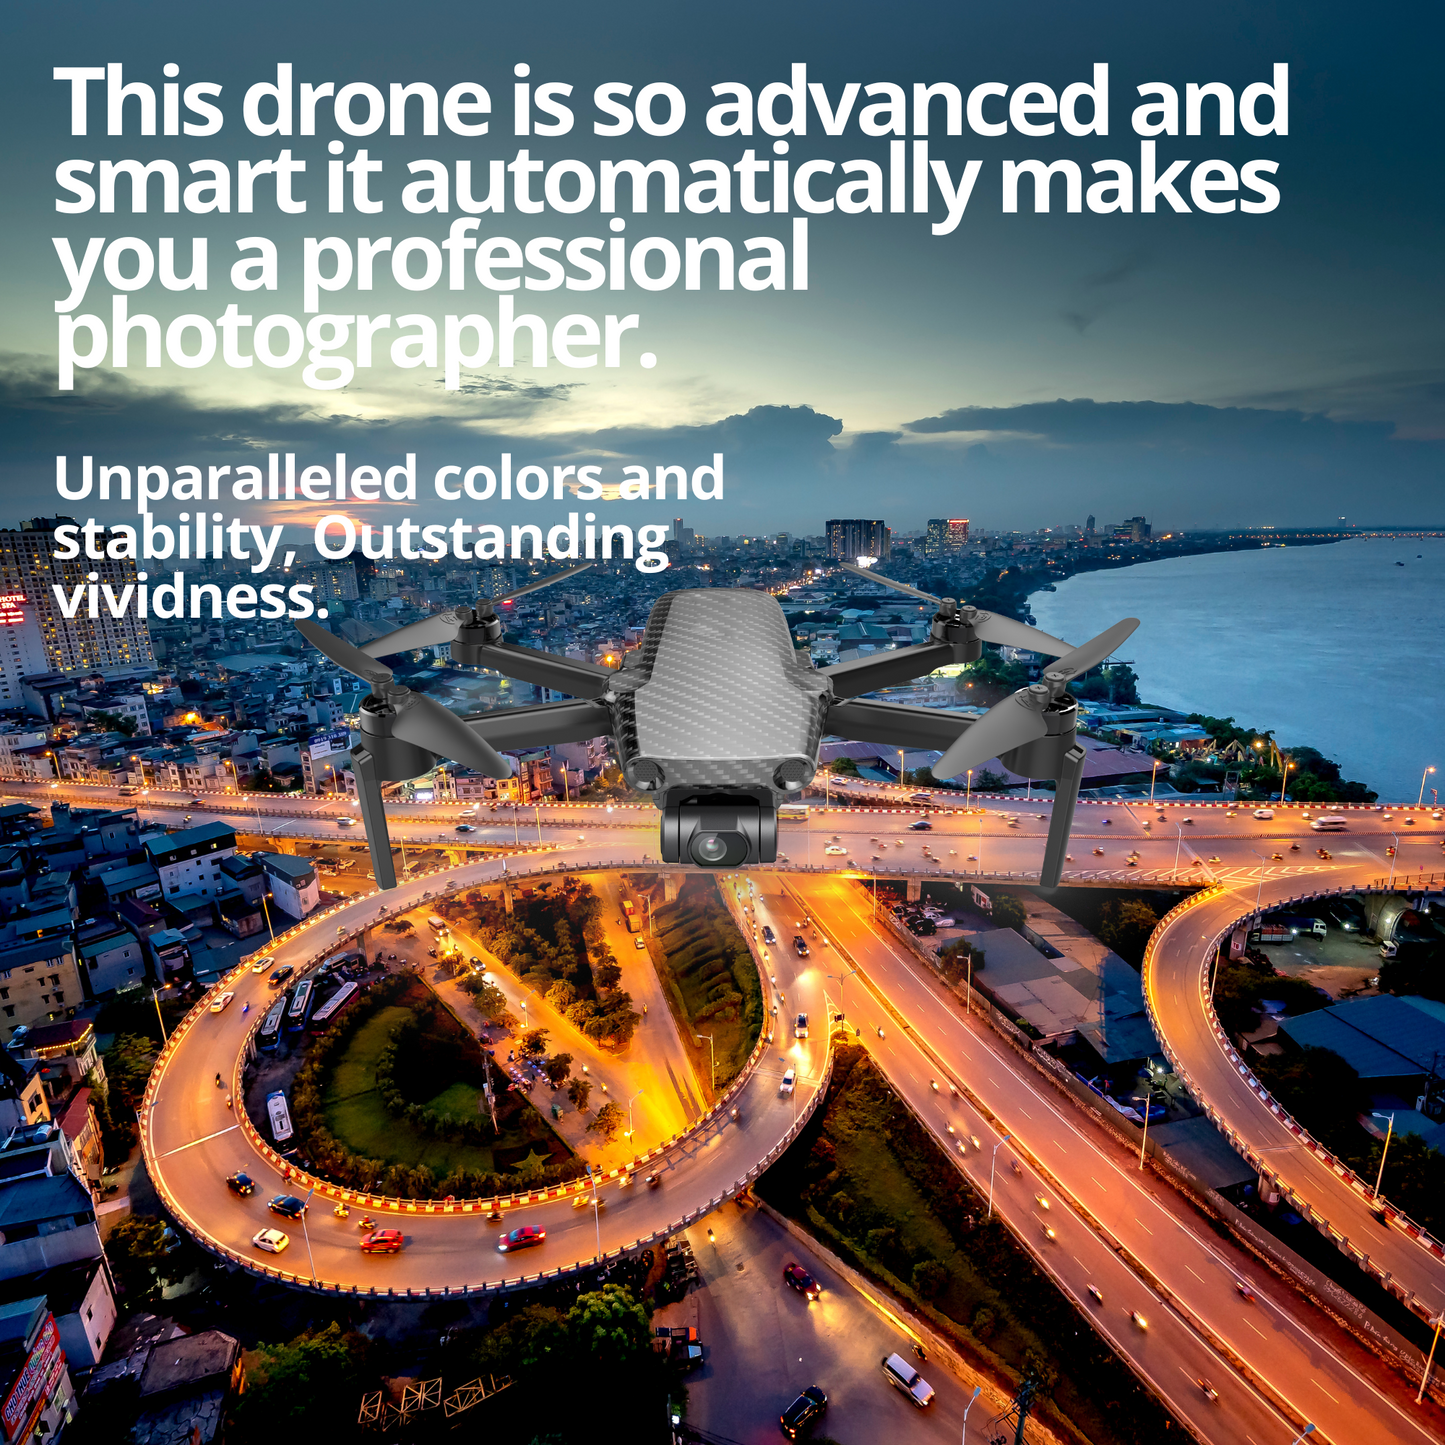 REFURBISHED: The Bigly Brothers Voyager Zino Drone, 249 Grams, 10km Range, 4K Ultra HD 30fps Camera, 3-Axis Ultra Stable Gimbal, 45mins Flight Time AI-Powered Follow Me, Big Baller Combo!